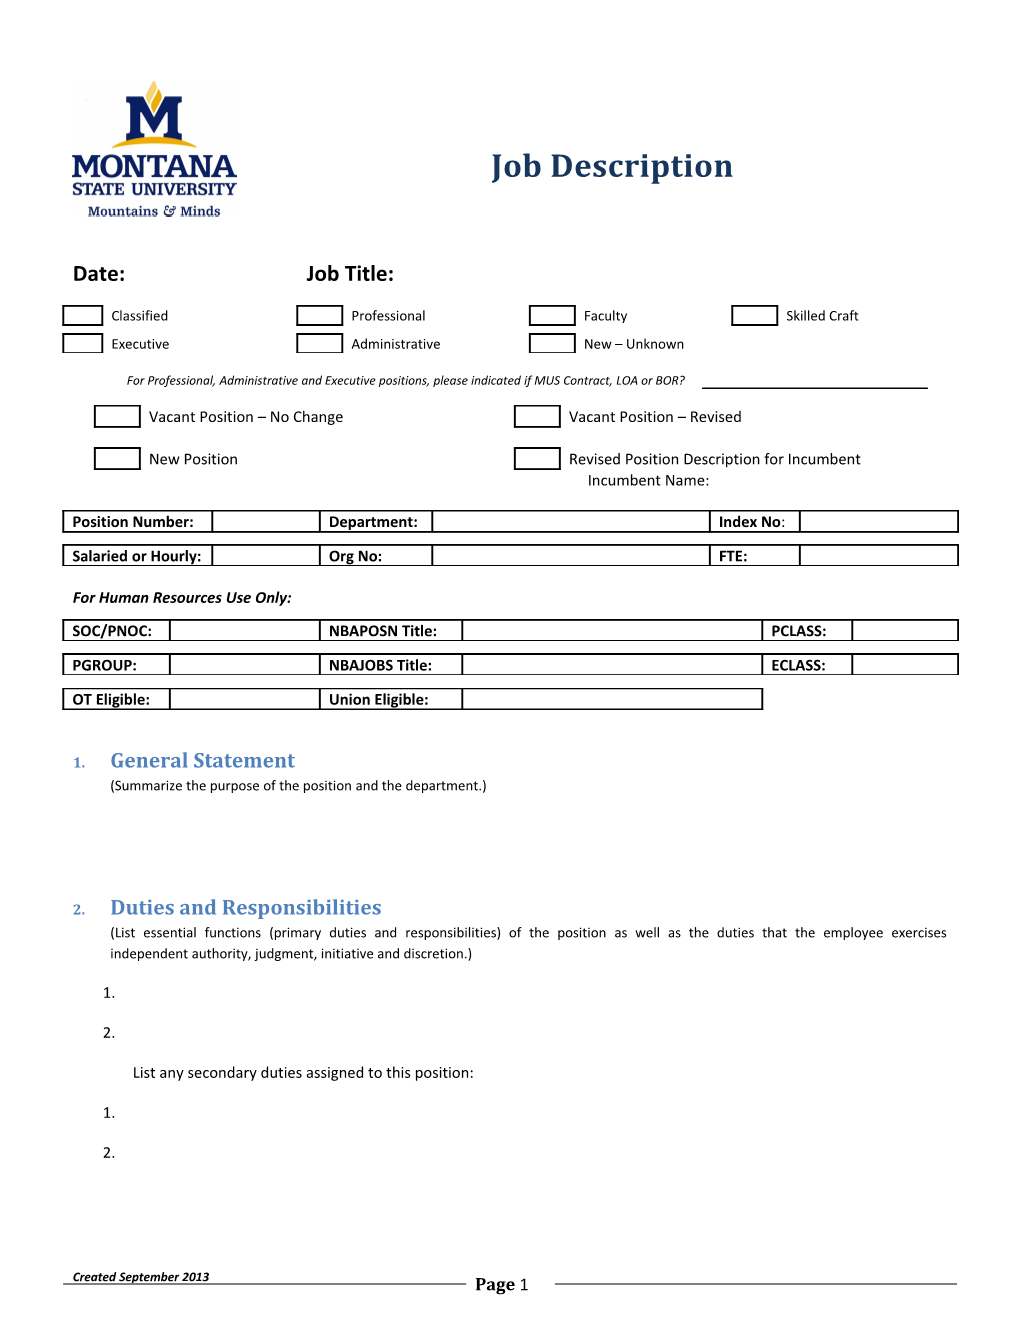 Position Description for Contract Professional Appointments